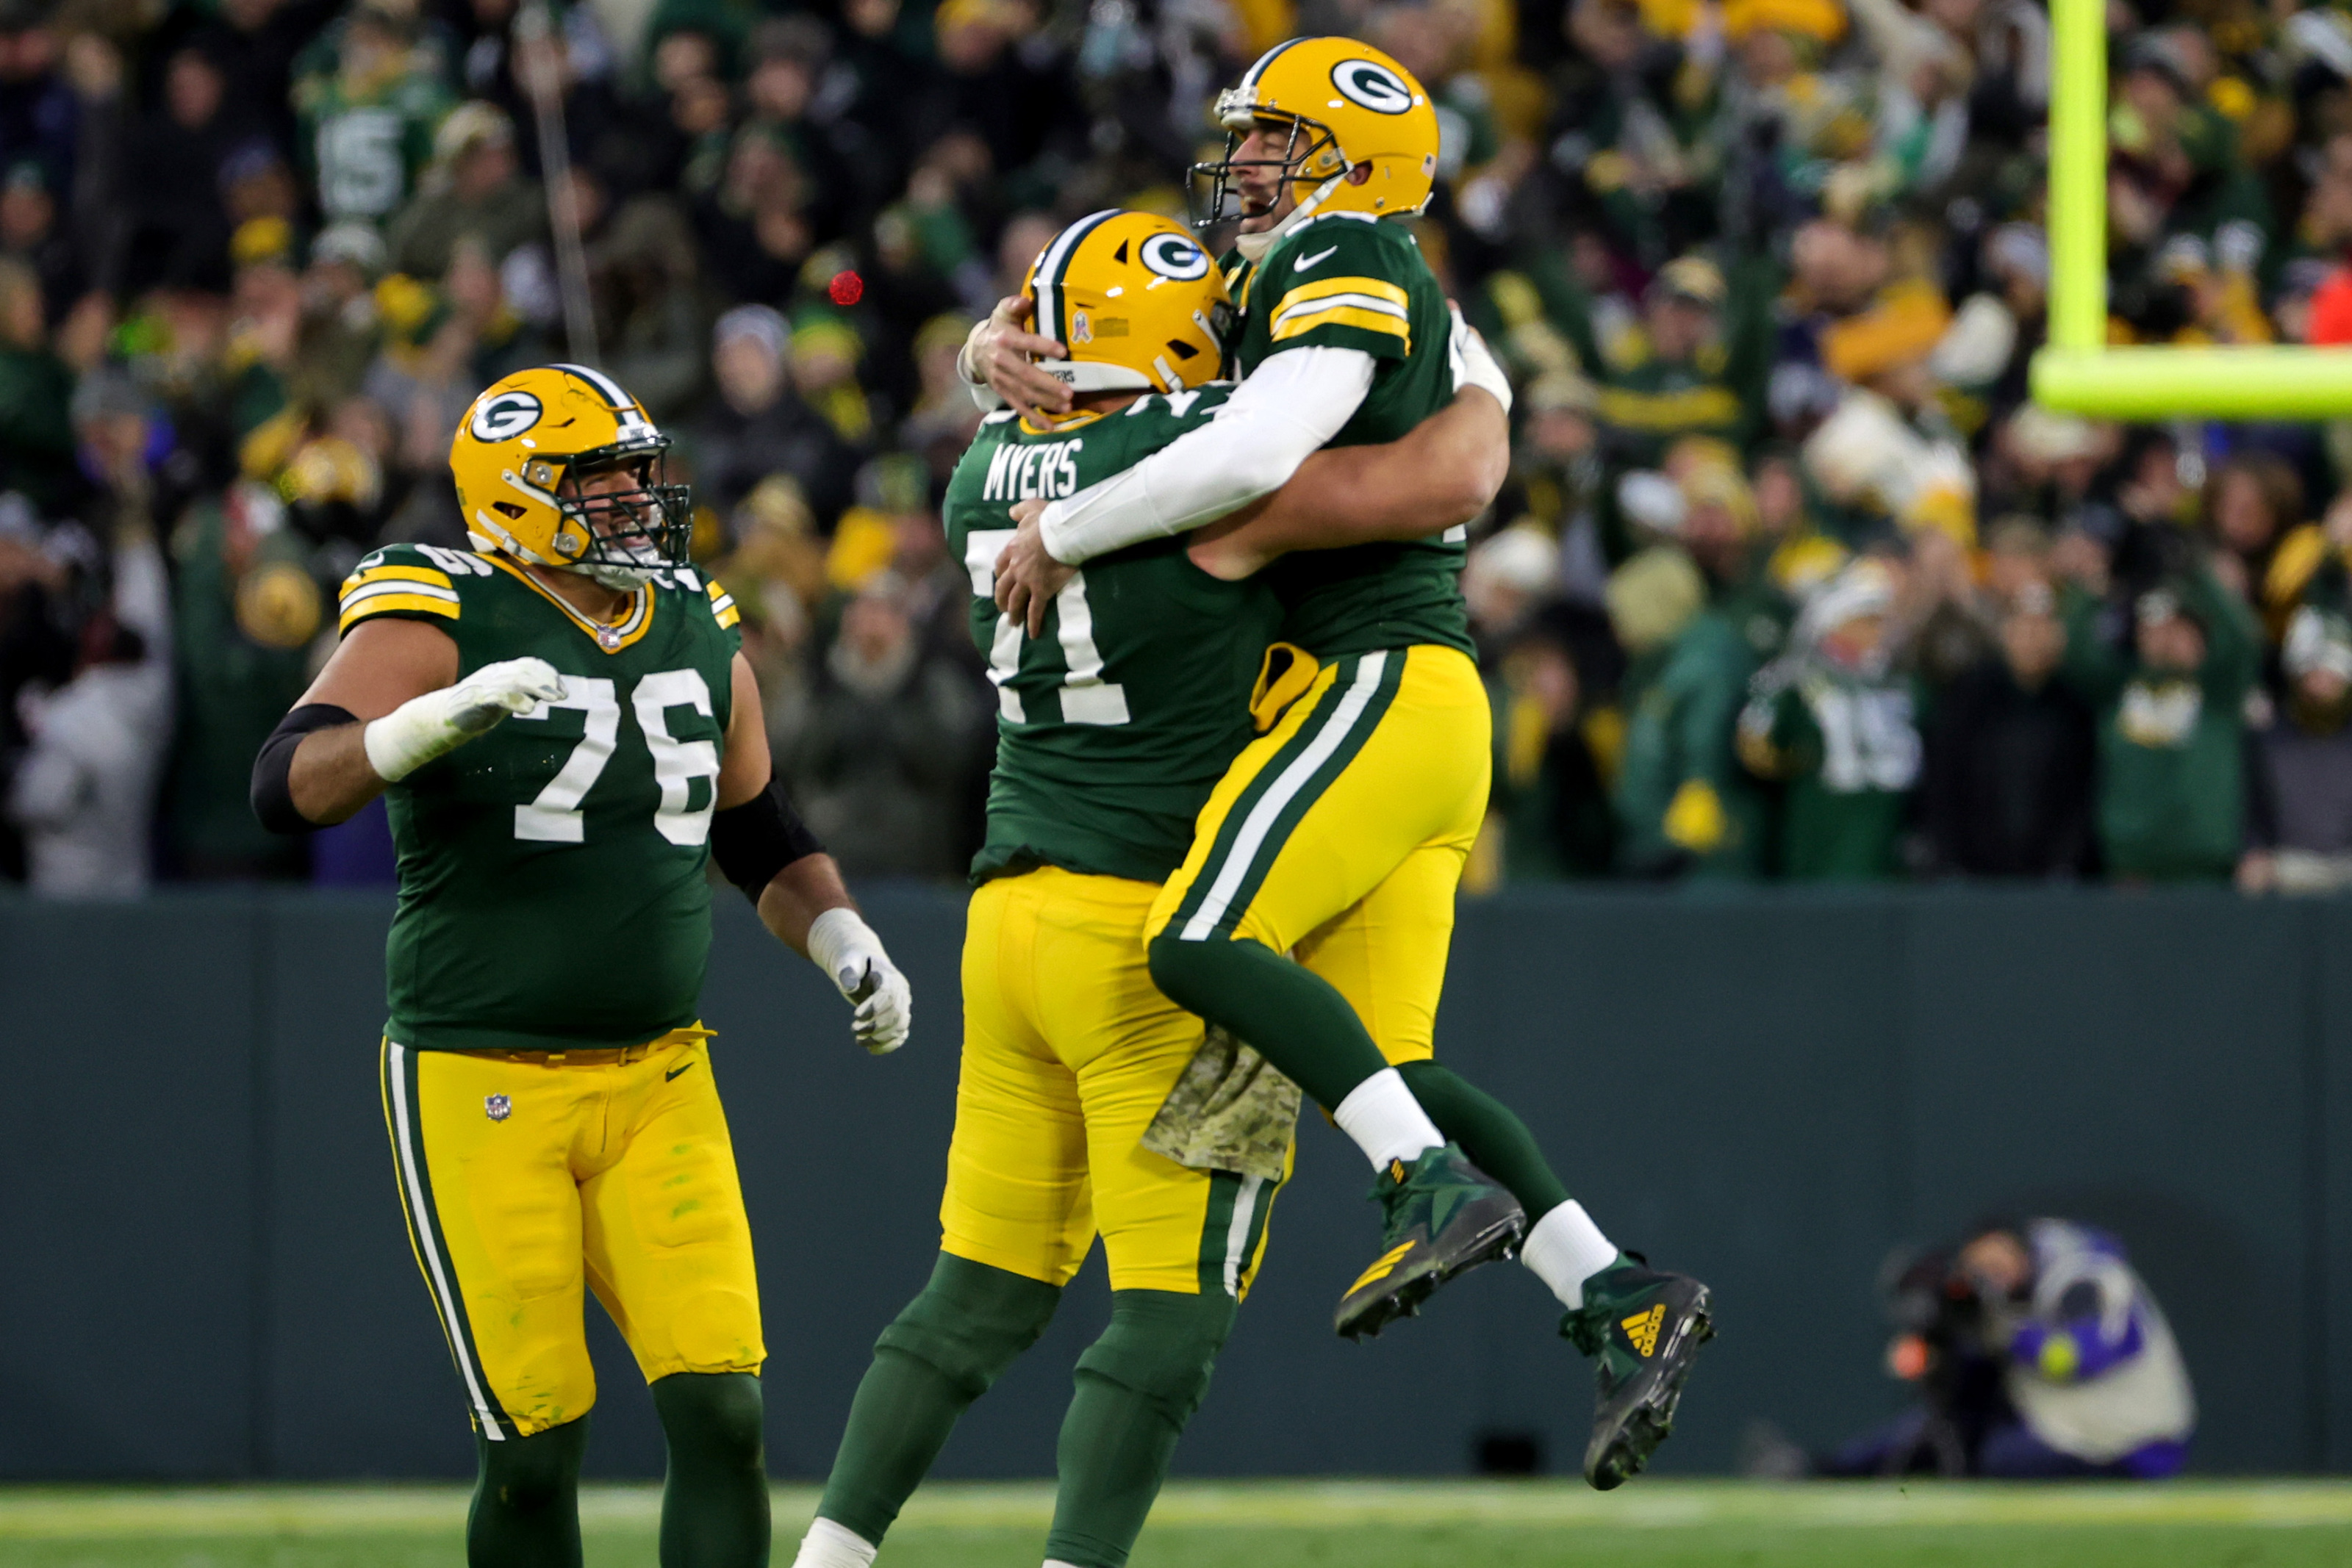 Continuity on offensive line helps spark Packers offense vs. Dallas